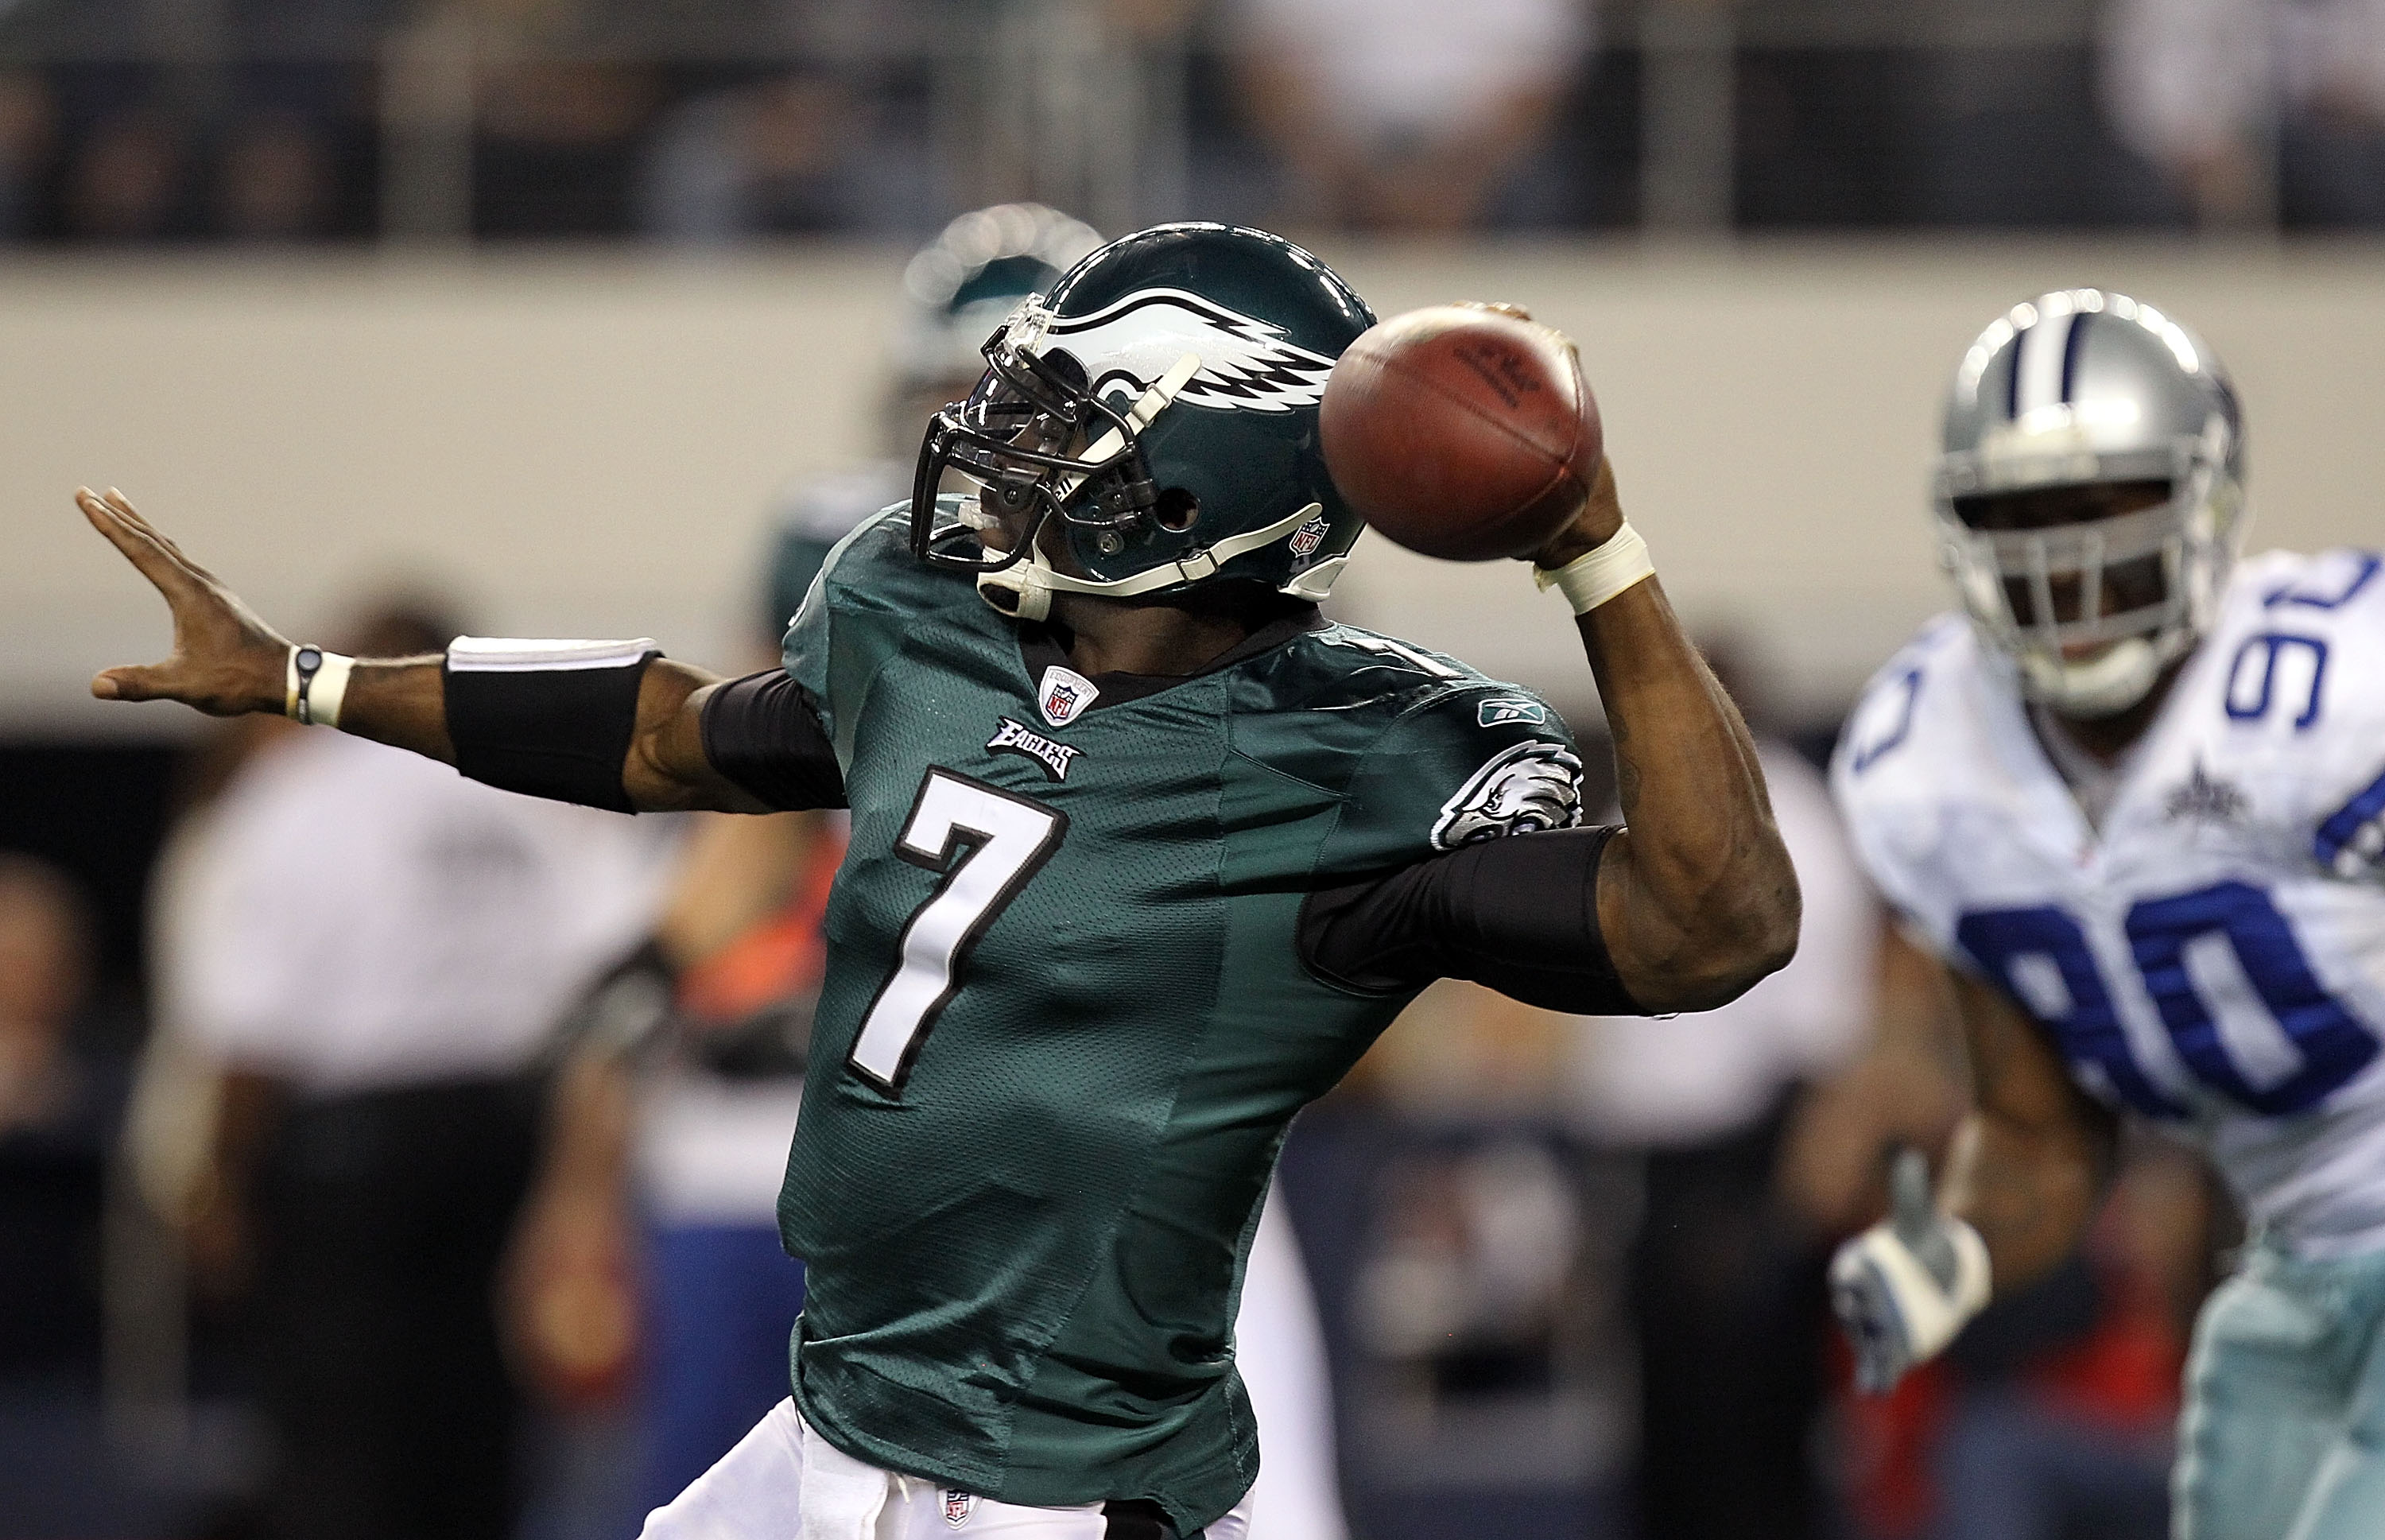 ARLINGTON, TX - DECEMBER 12:  Quarterback Michael Vick #7 of the Philadelphia Eagles drops back to pass against the Dallas Cowboys at Cowboys Stadium on December 12, 2010 in Arlington, Texas.  (Photo by Ronald Martinez/Getty Images)